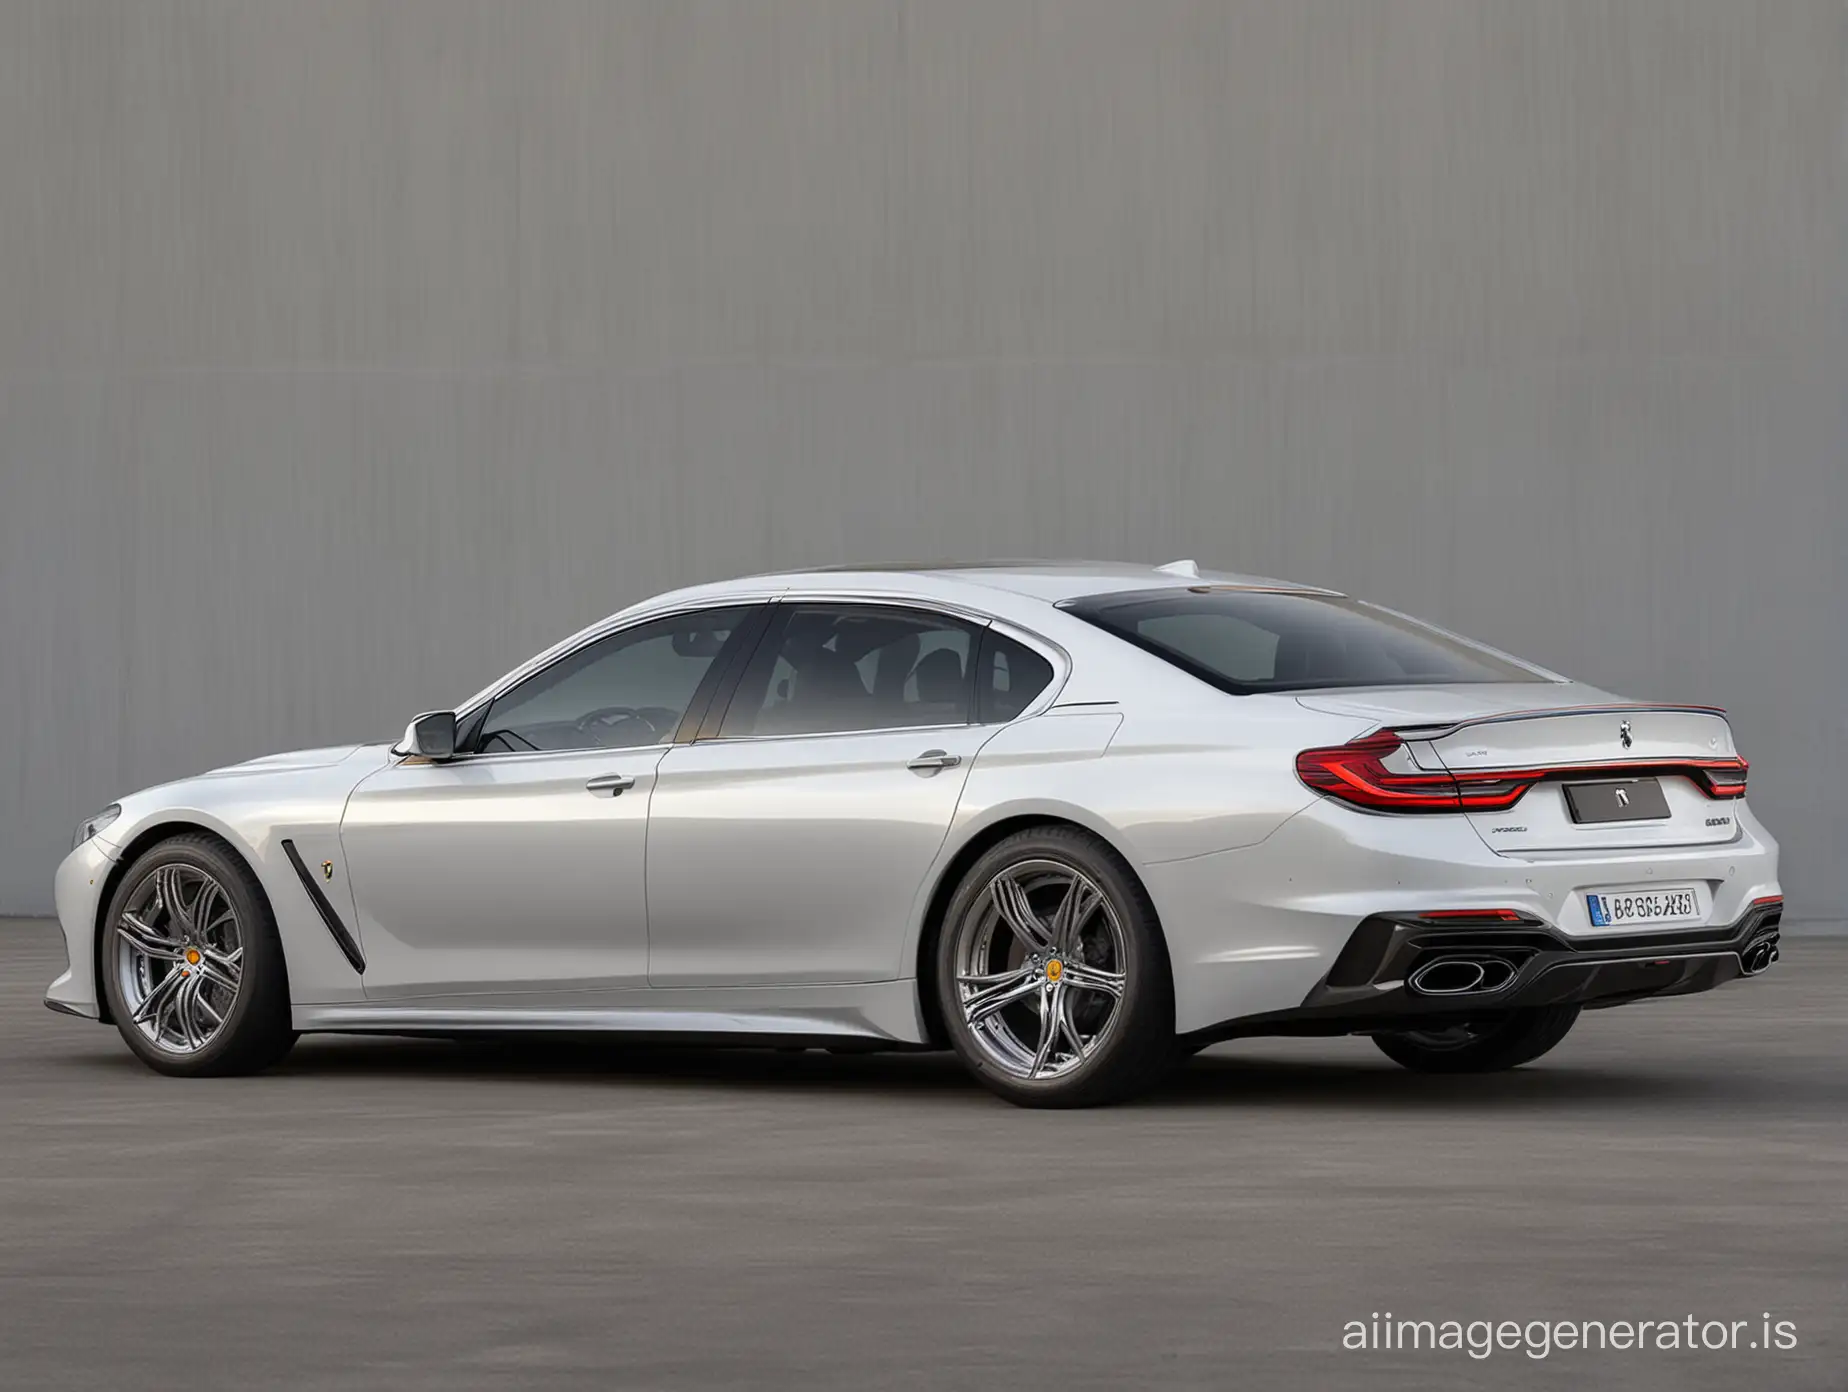 If the design department of Ferrari redesigned the BMW 7 series.